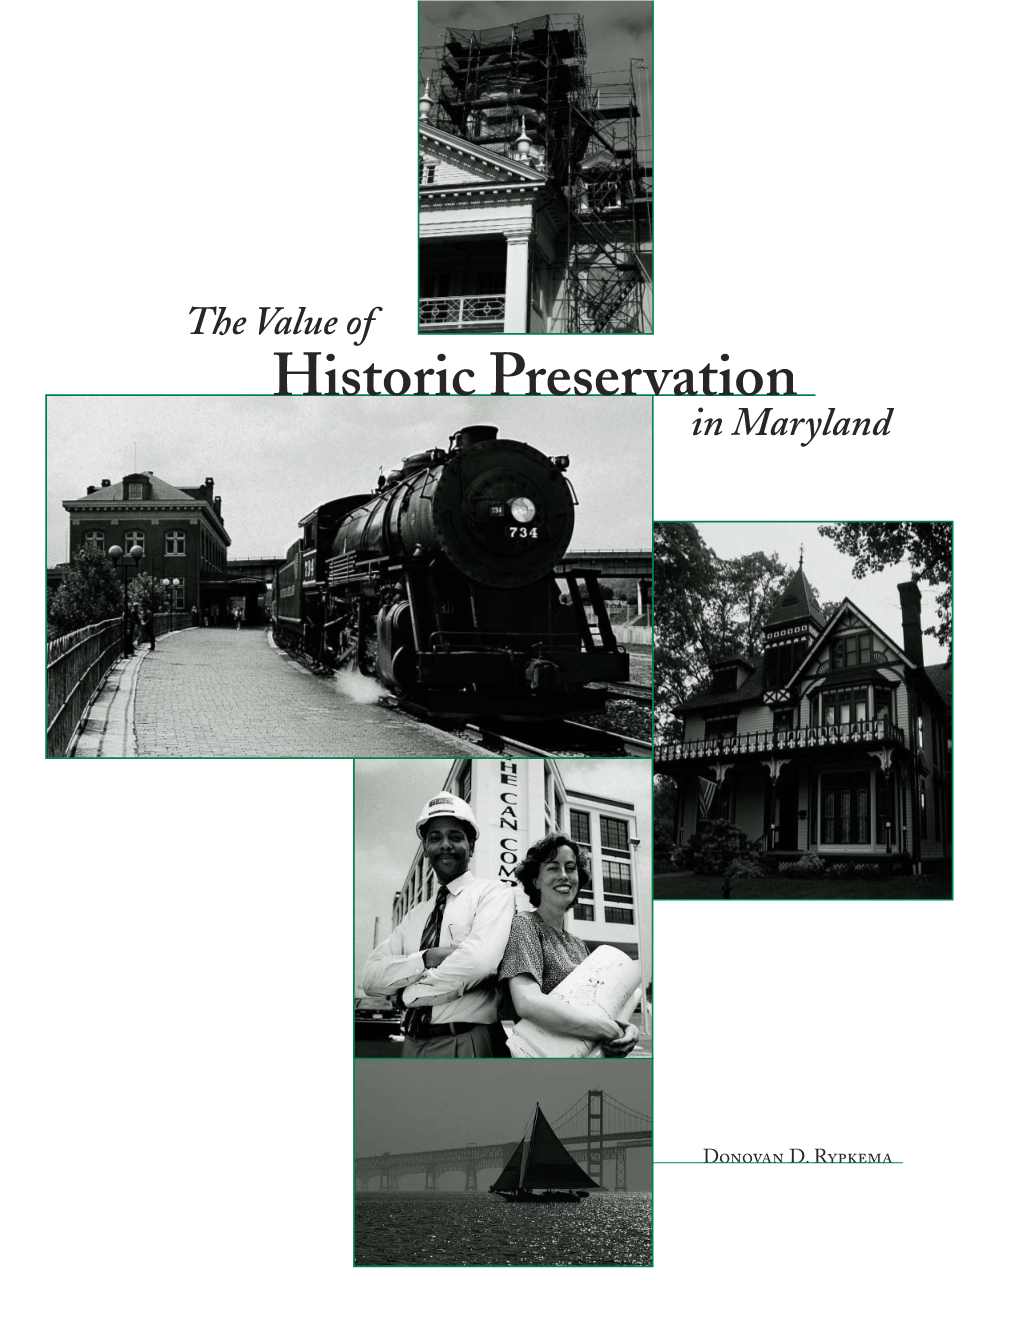 The Value of Historic Preservation in Maryland (1999)